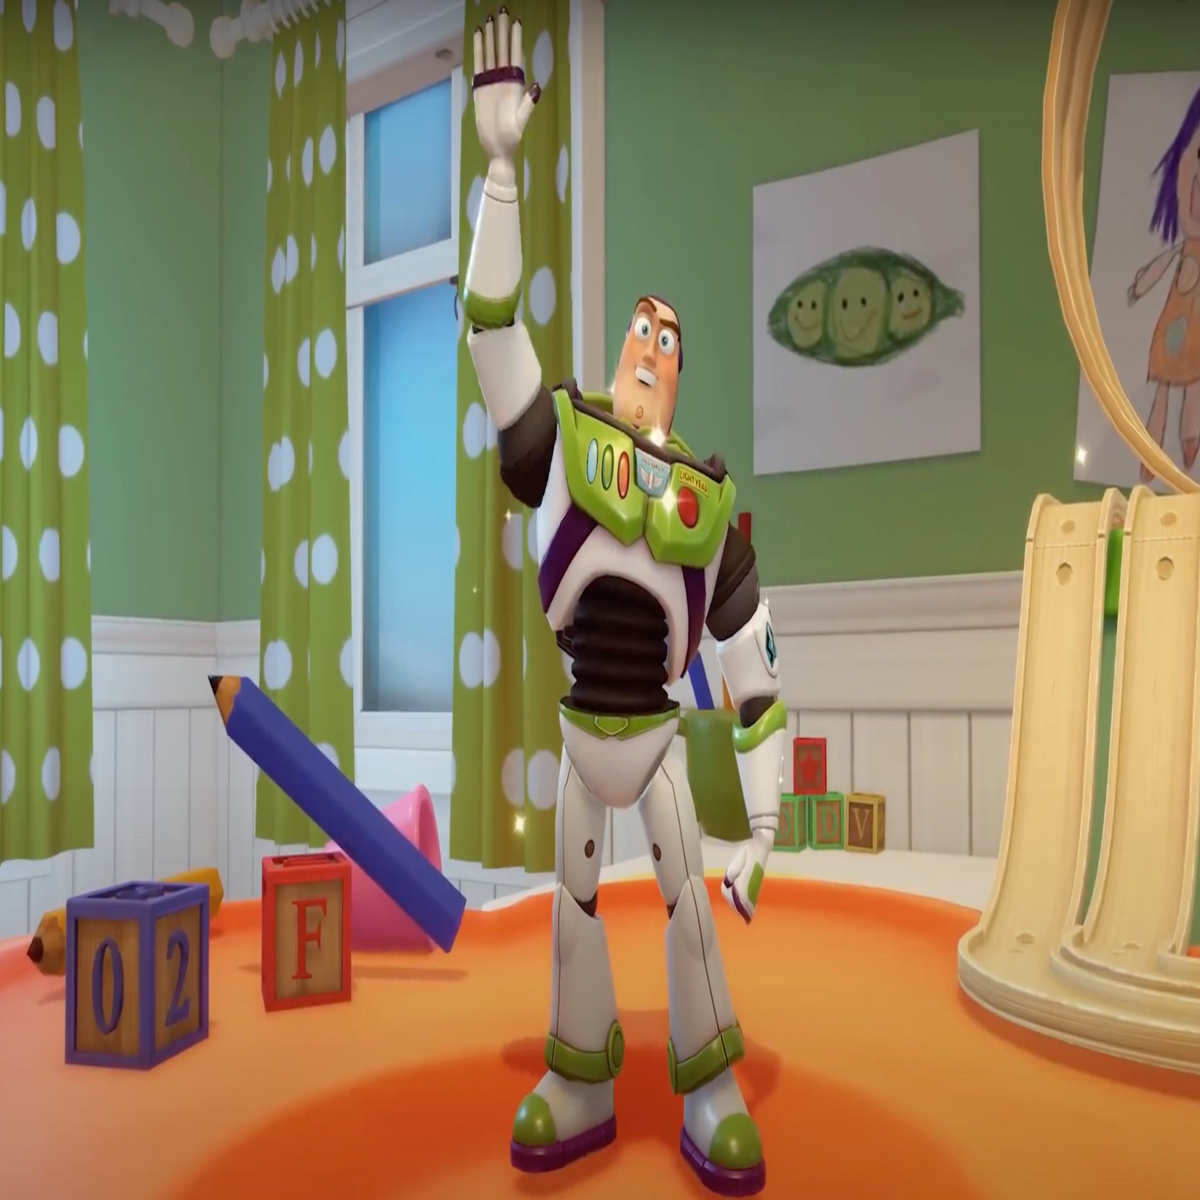 Disney Dreamlight Valley is getting a Toy Story update in December